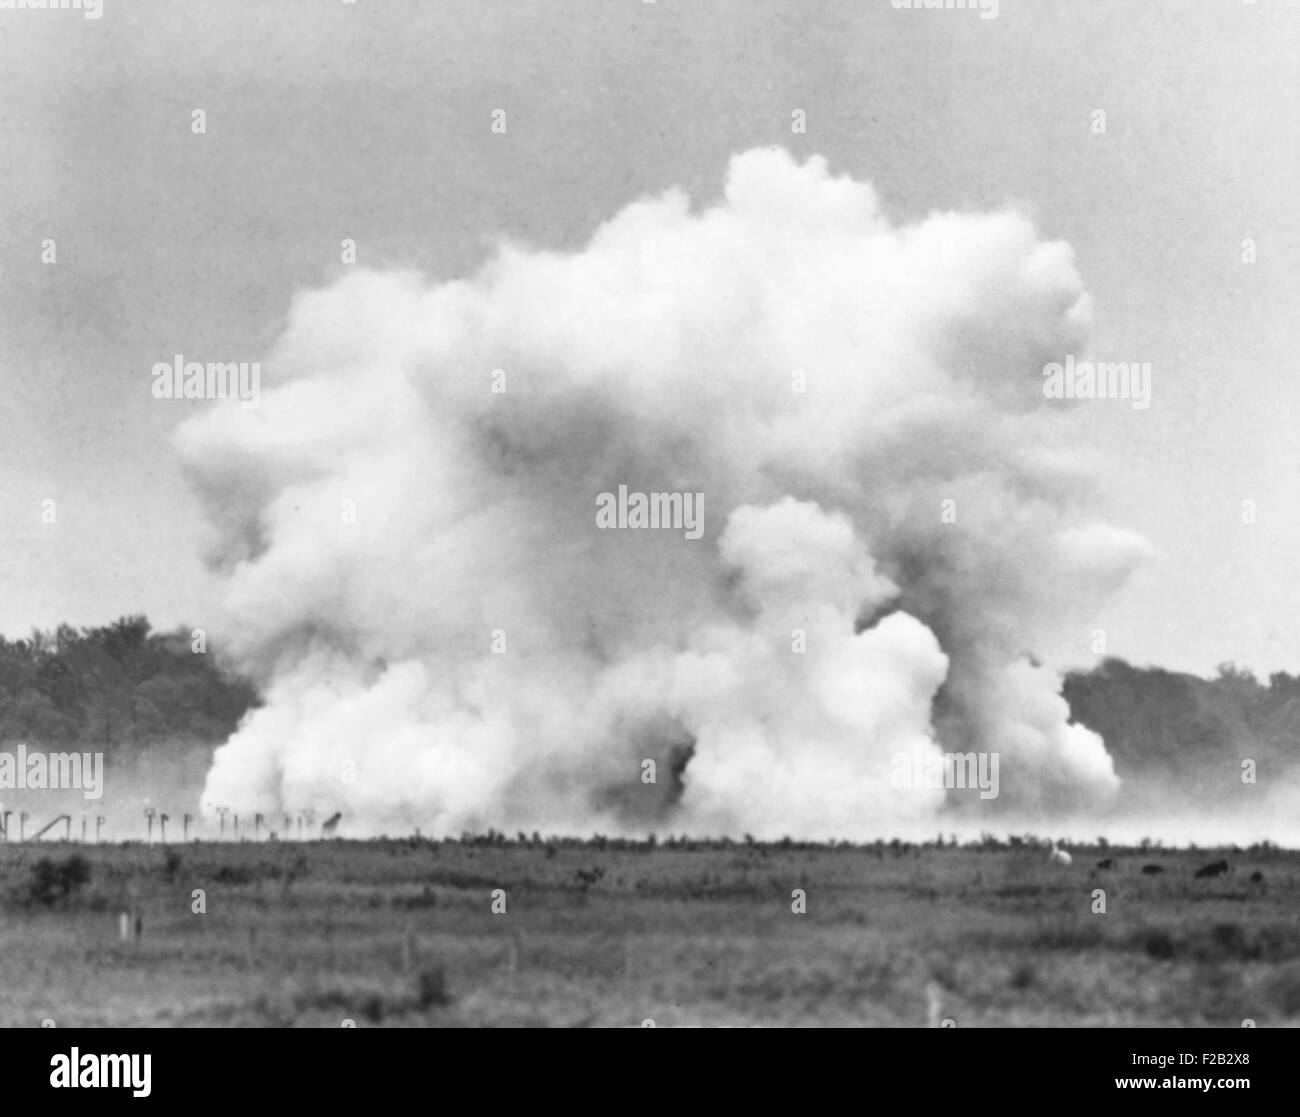 The explosion of Lester P. Barlow's 'GLMITE' bomb at Aberdeen Proving Ground, Maryland. The 1,000 pound liquid oxygen bomb created an powerful roar, but little damage. 84 test goats near the explosion, which Barlow expected to be 'blown to bits', were unharmed. May 25, 1940. (CSU 2015 8 481) Stock Photo